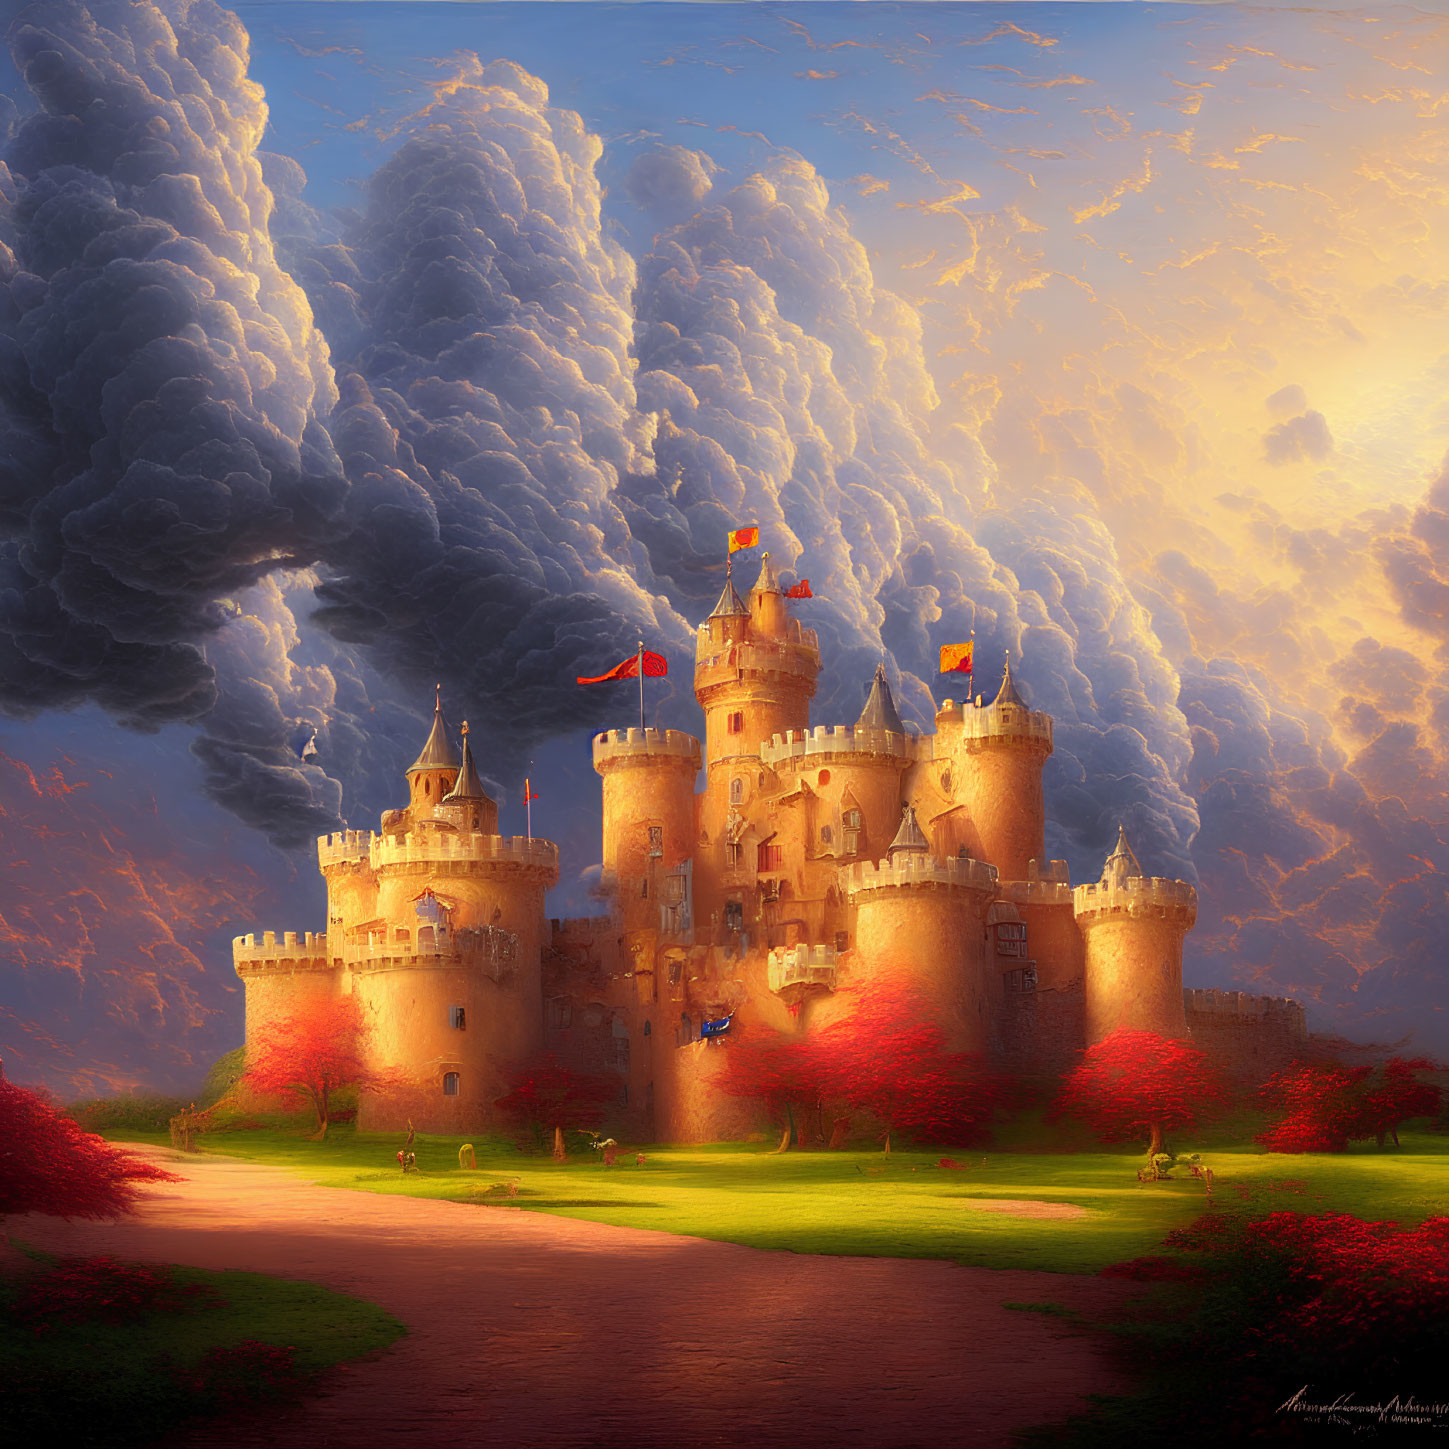 Majestic castle with turrets and red flags in scenic landscape